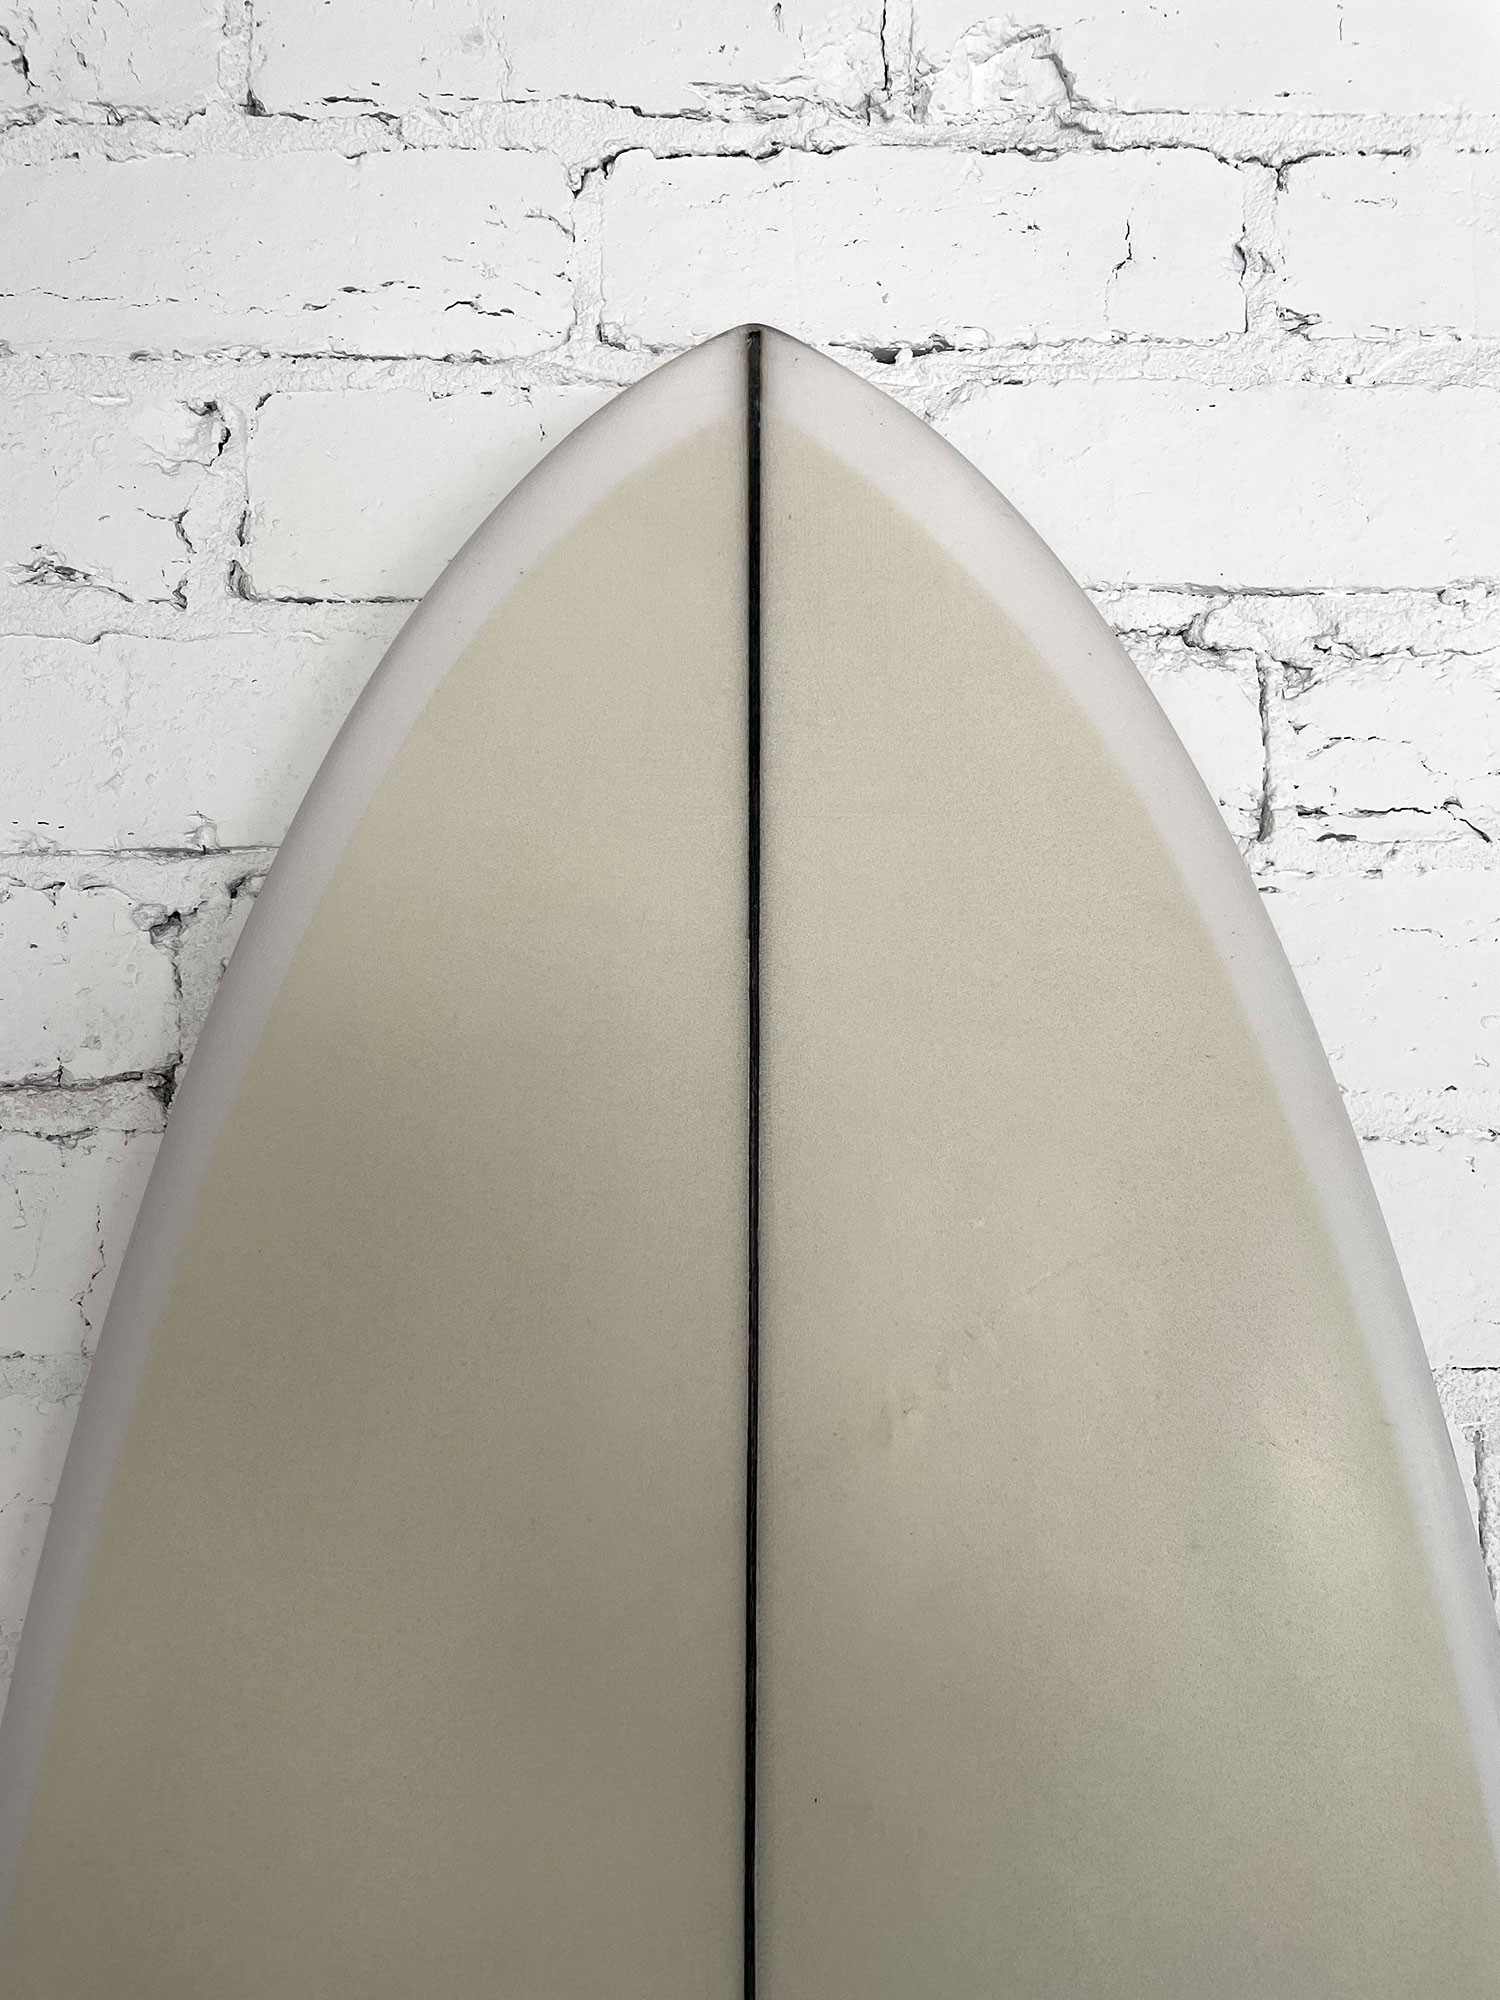 Chilli Surfboards Mid Strength Review – Empire Ave